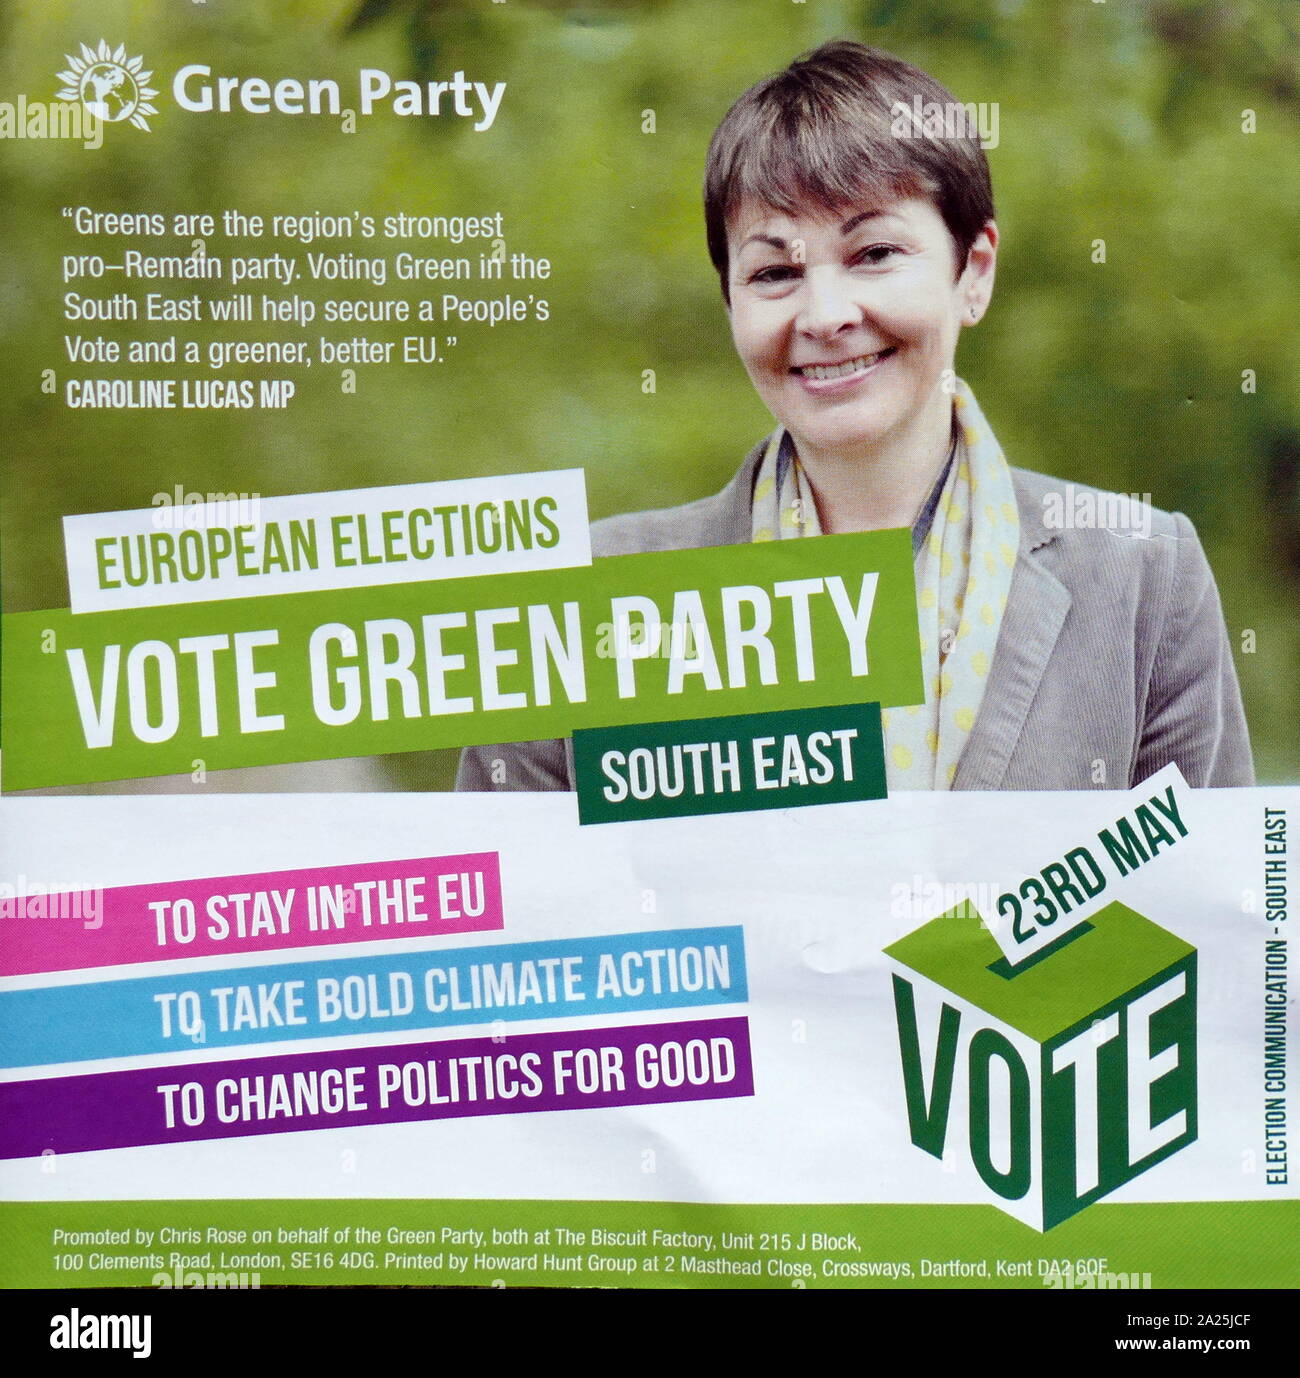 Caroline Lucas, Leader of the Green Party in the British Parliament, appears on an election leaflet for the European Parliament Elections May 2019 Stock Photo